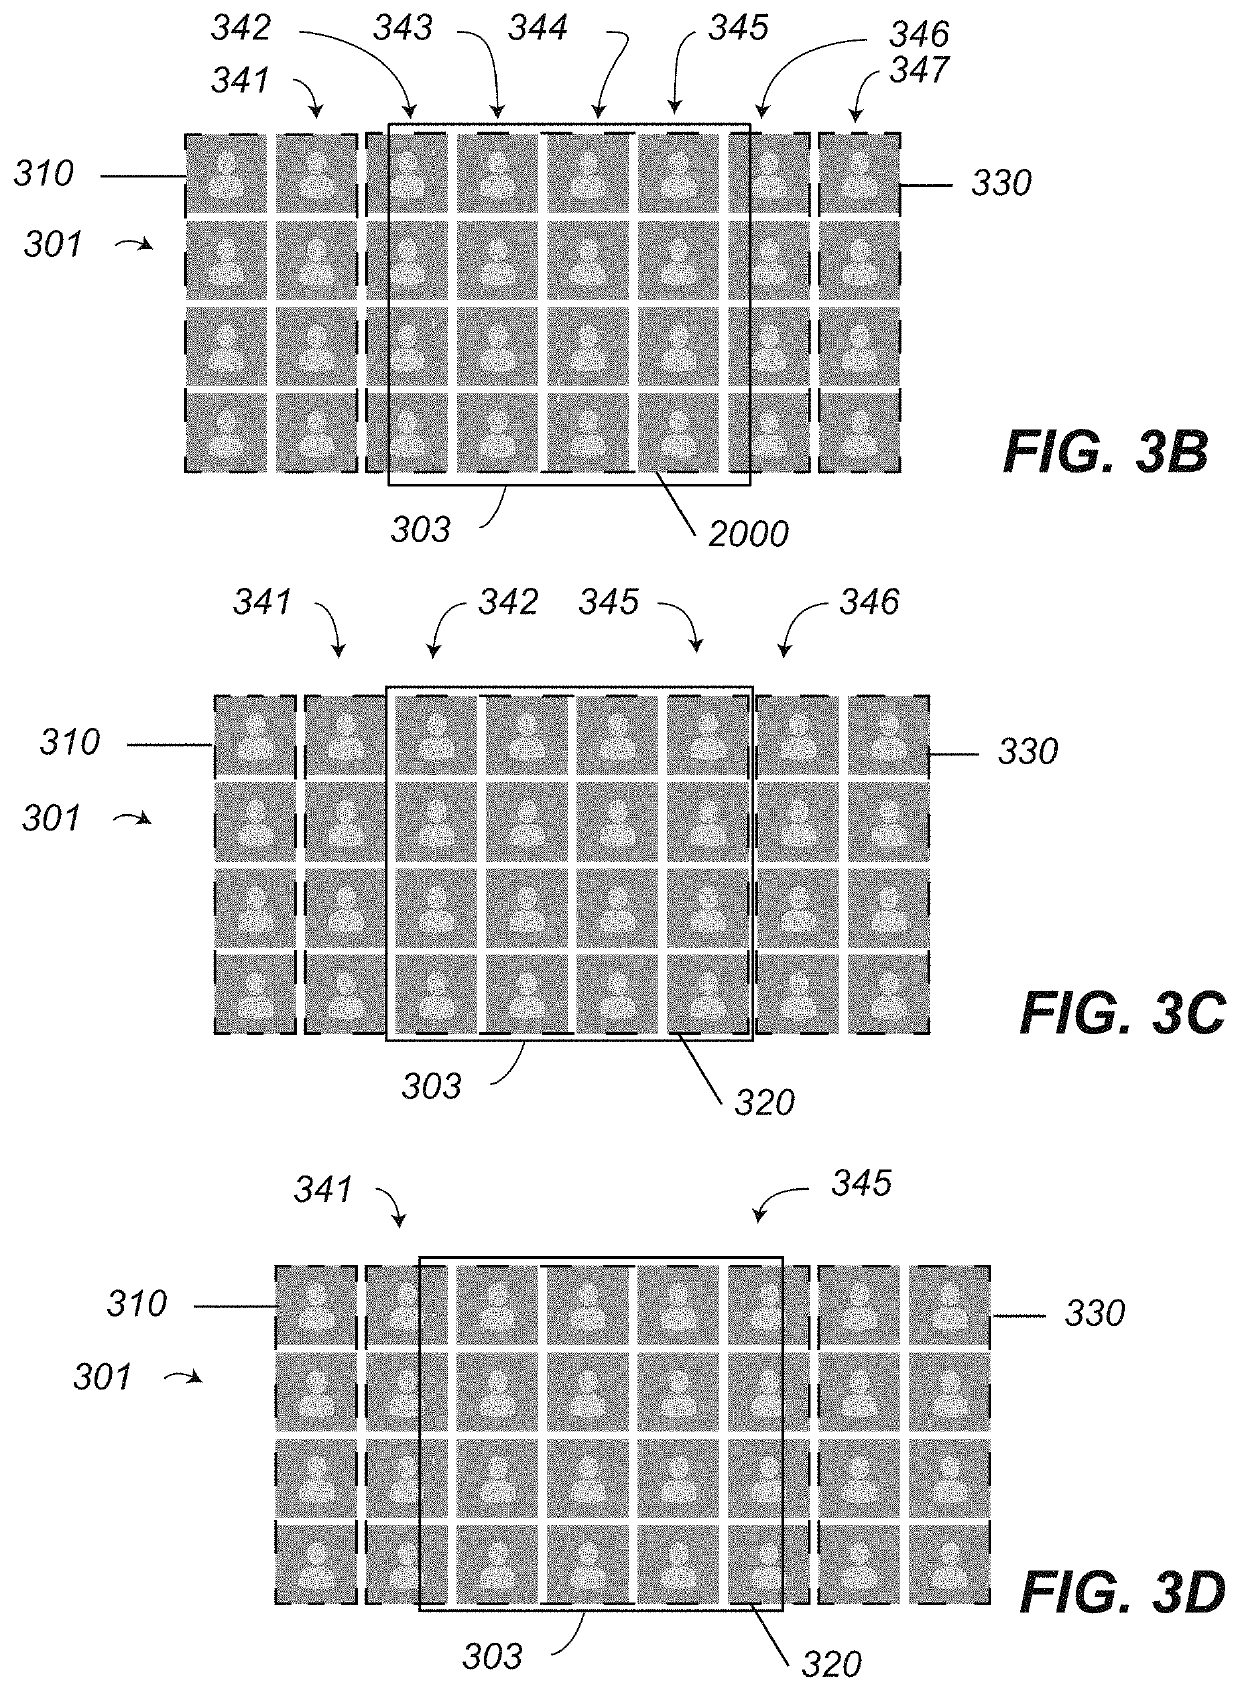 System and method for displaying a large number of participants in a videoconference